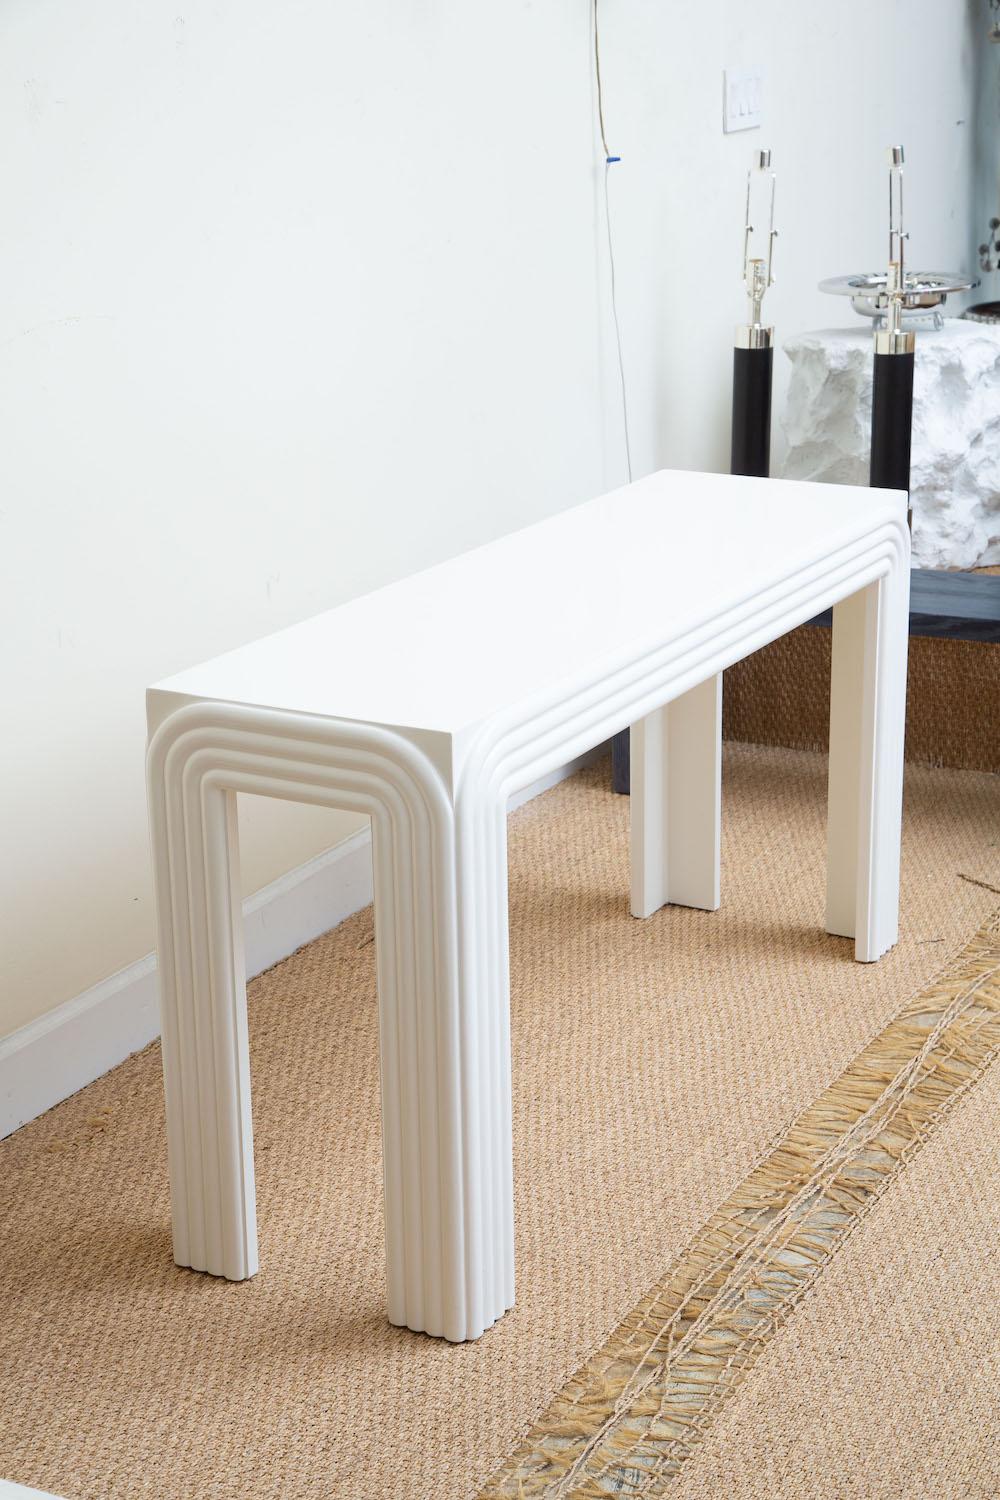 This newly restored vintage white lacquered over wood console table or sofa table has 4 curved banded applied raised designs. It has been restored to the best it can be now. The top is not completely smooth; as is commensurate with age. This is very